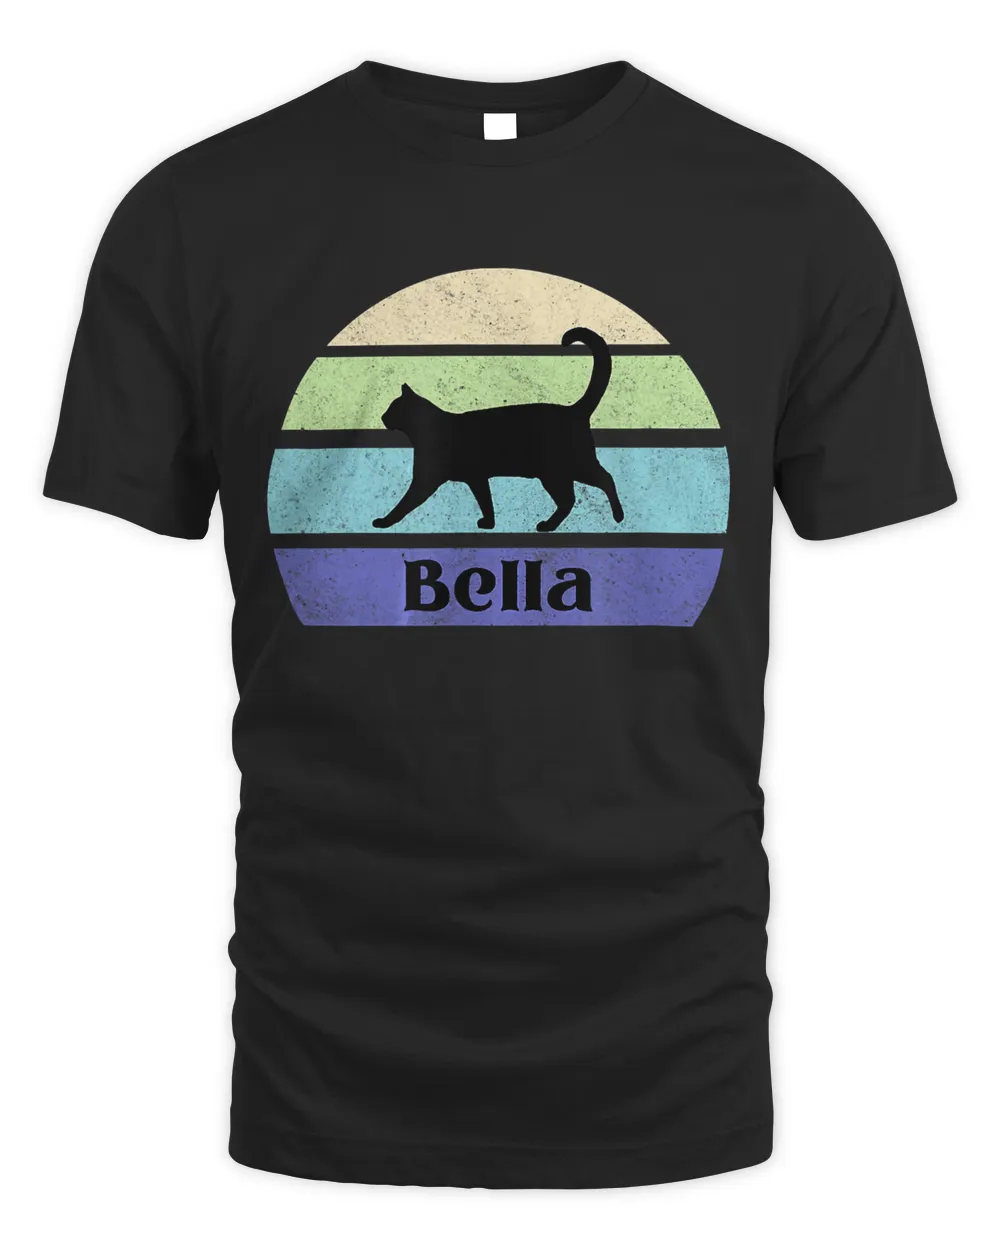 Belle- Silhouette Cat with Vintage, Retro style Cat Name T-Shirt